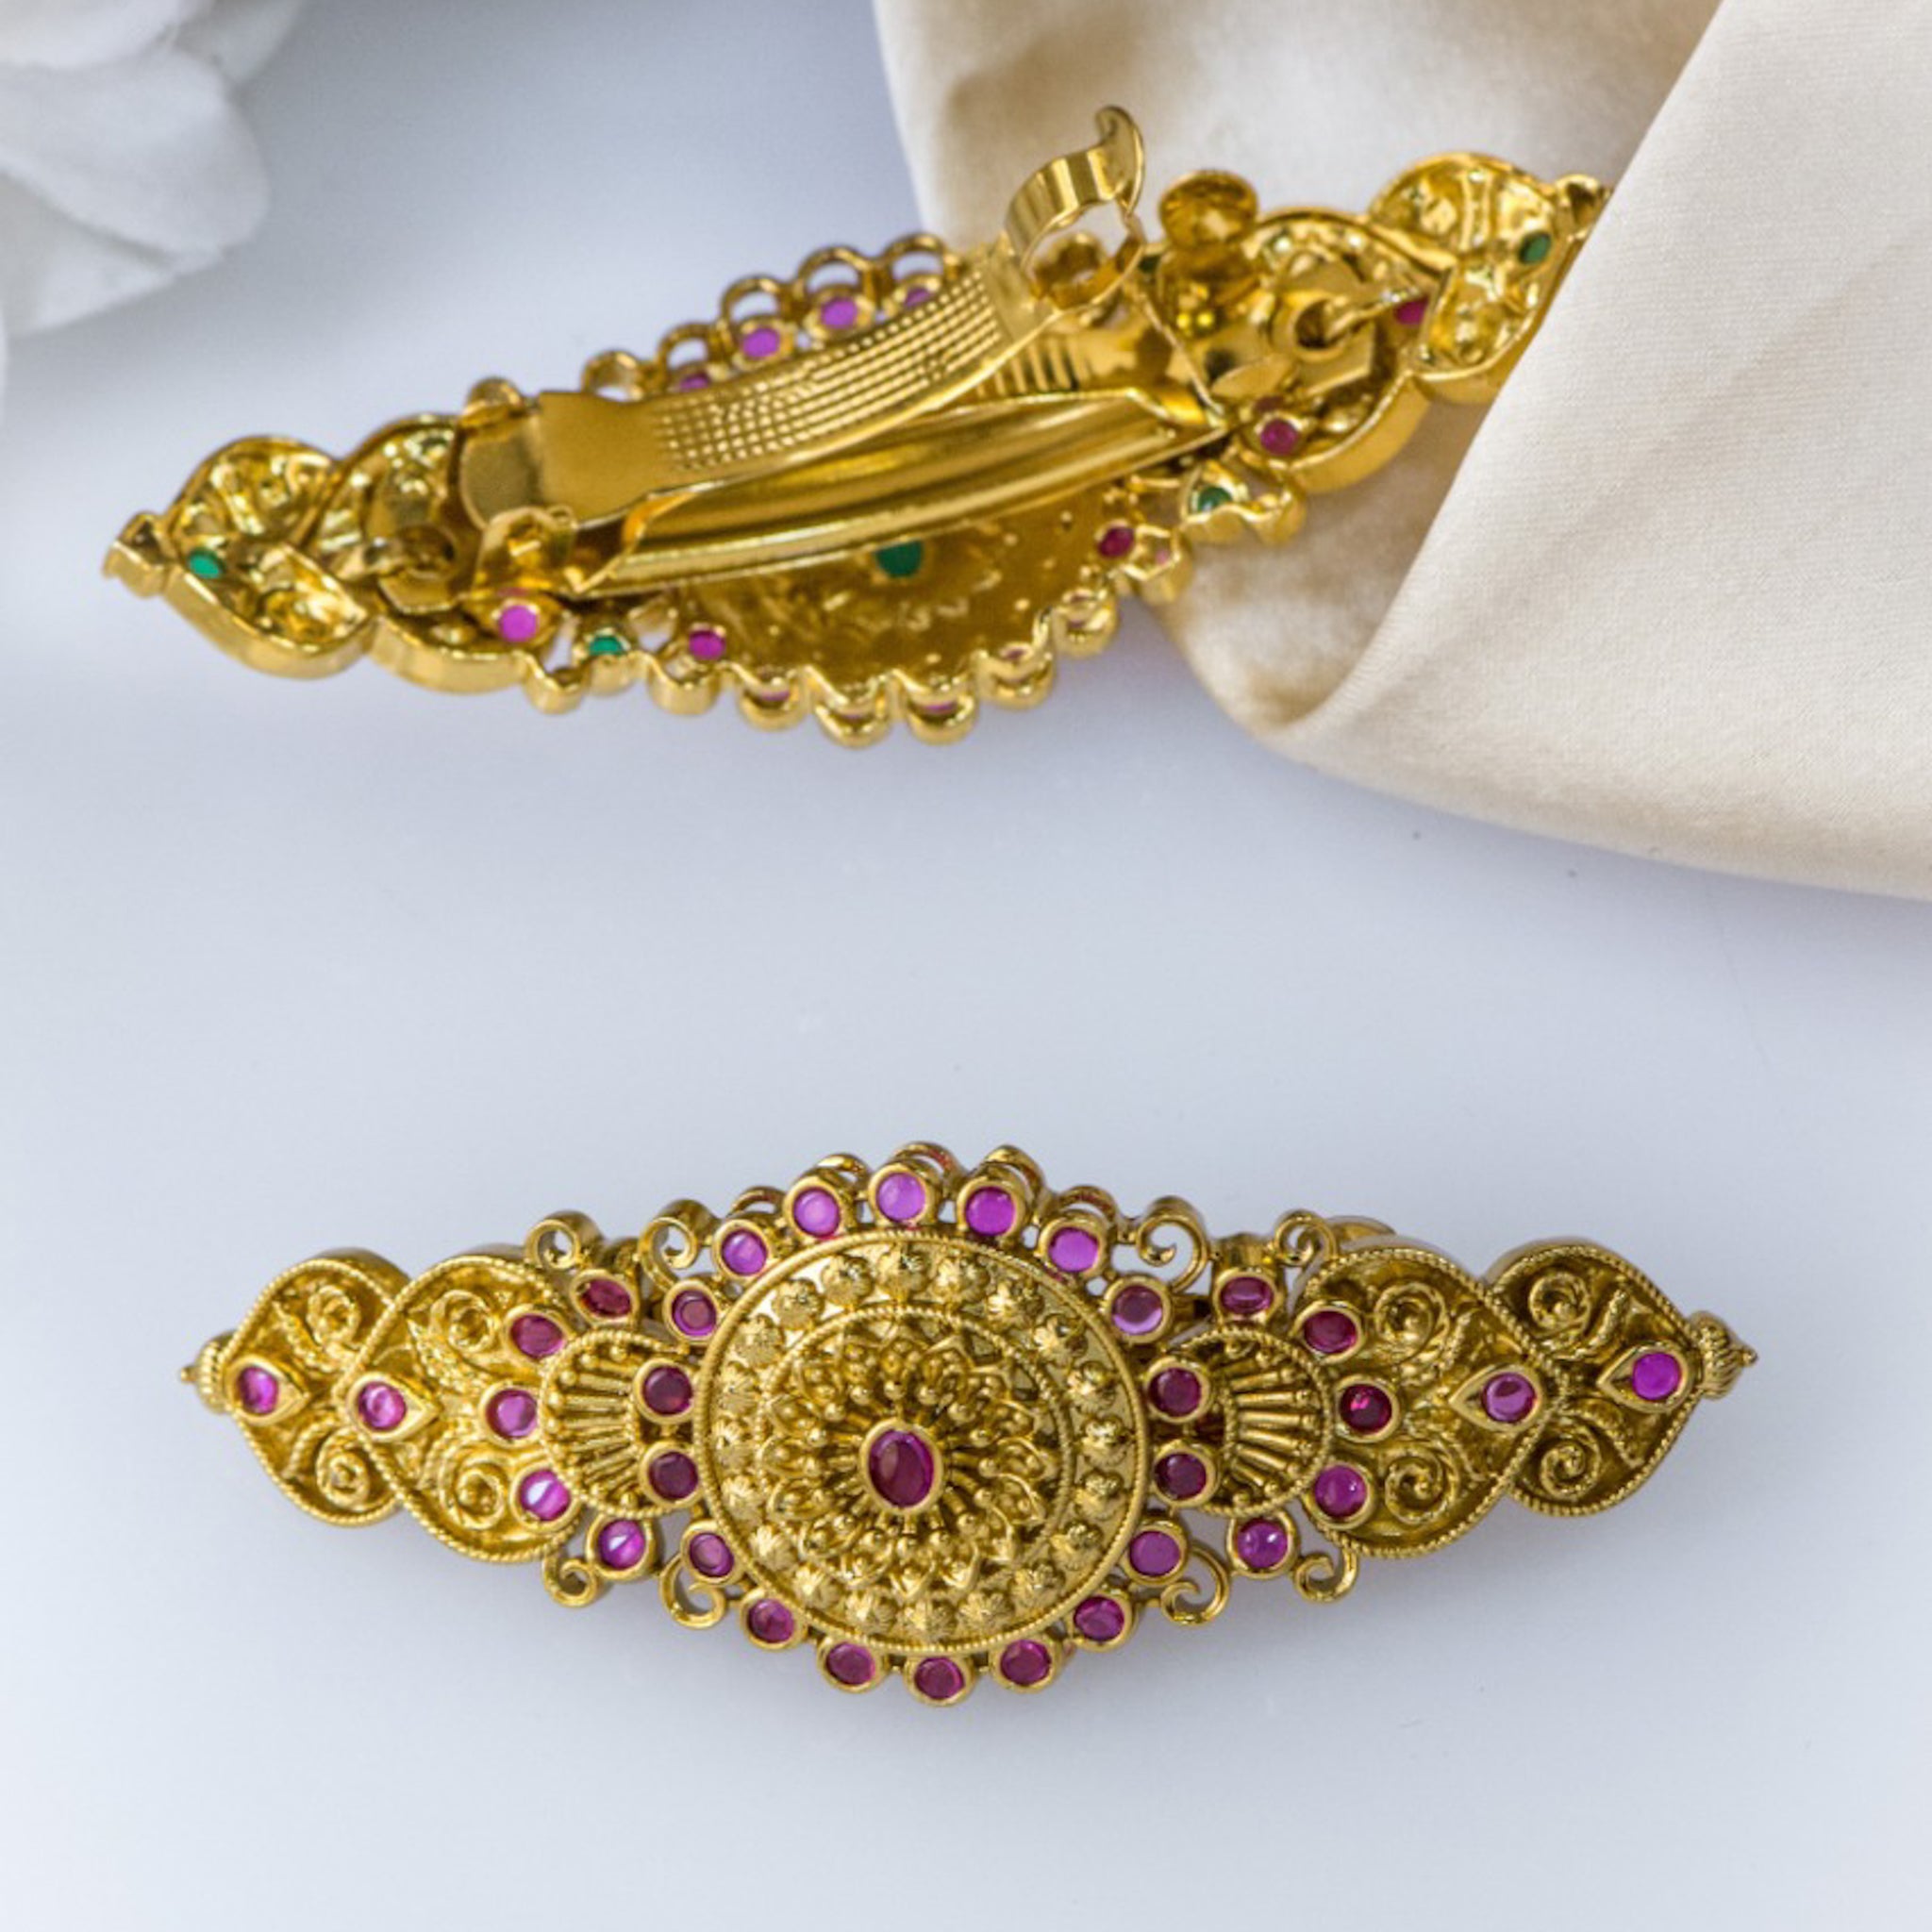 Punjabi Traditional Jewellery  featured Gold Finished Pippal Patti Hair  Clips   Shop our latest collection at our store or visit our website  today to buy  You  may also DM